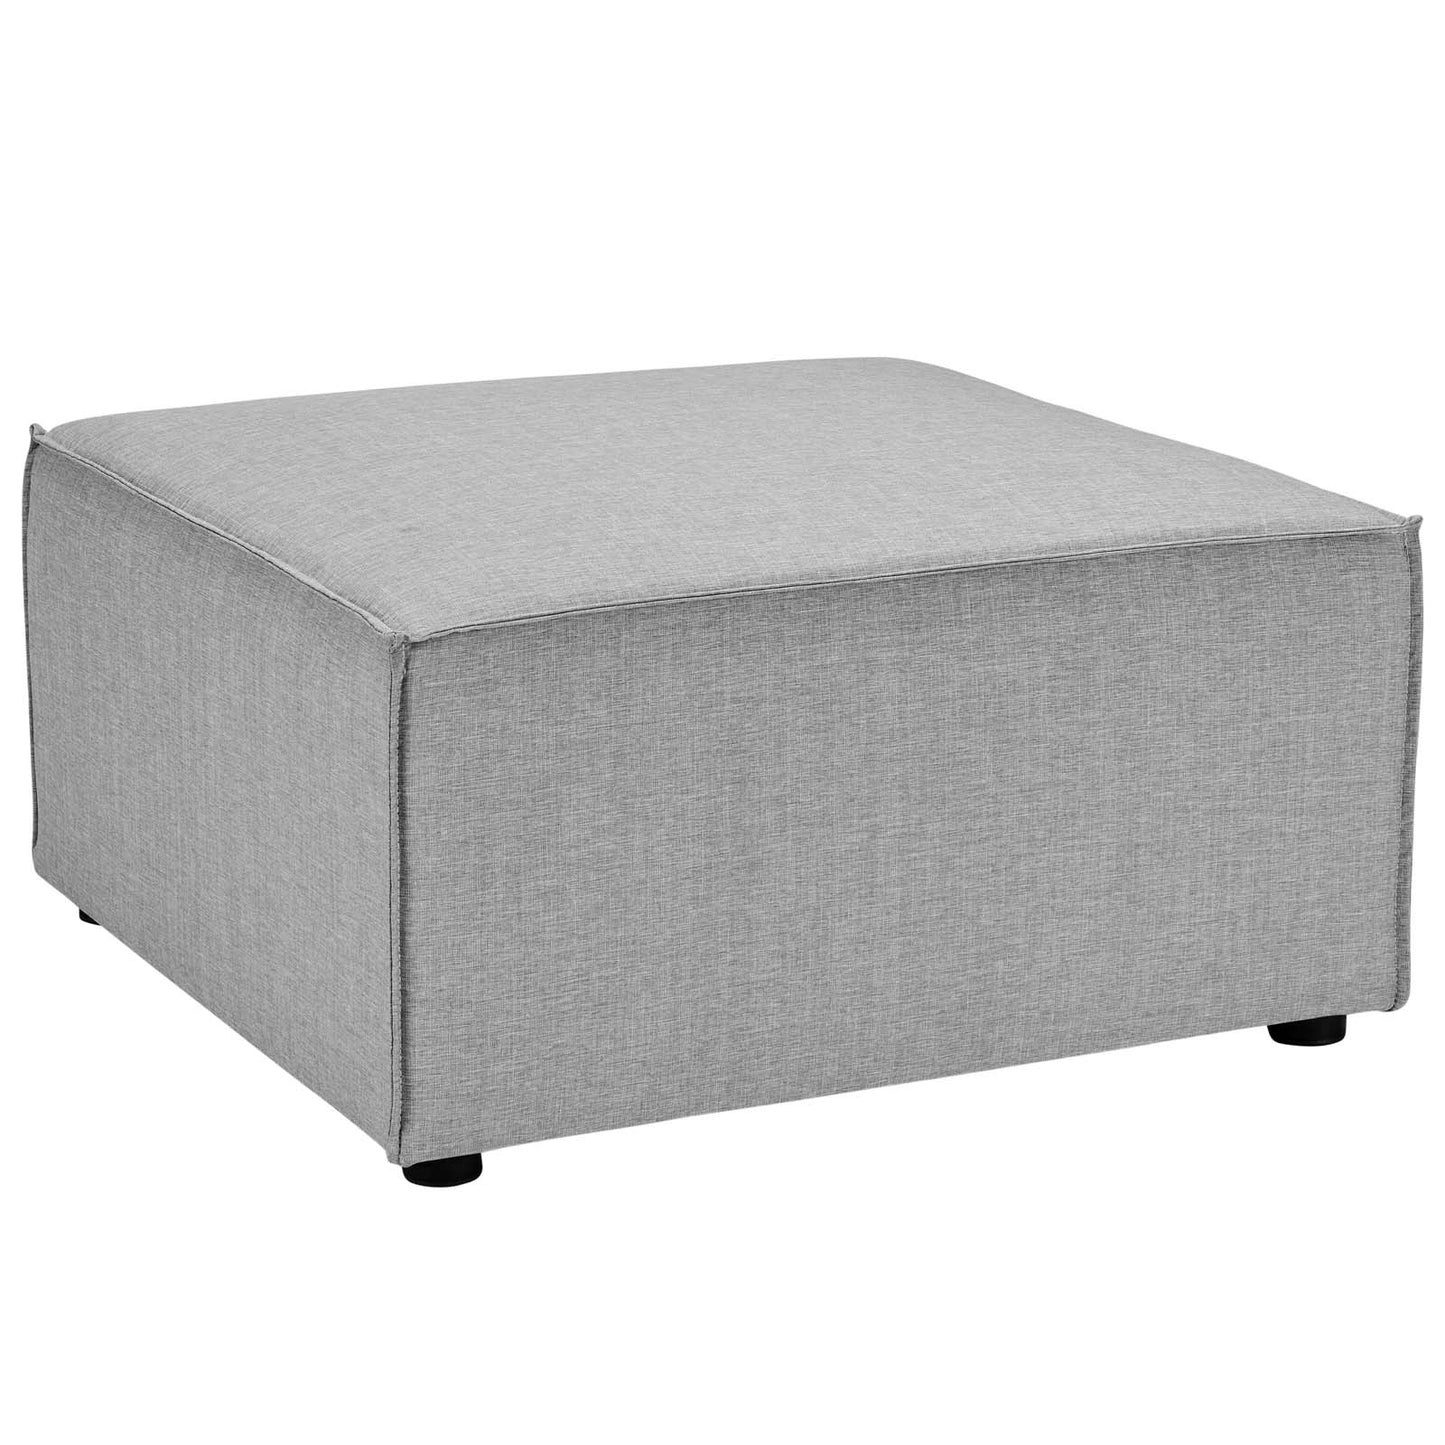 Saybrook Outdoor Patio Upholstered Loveseat and Ottoman Set Gray EEI-4378-GRY